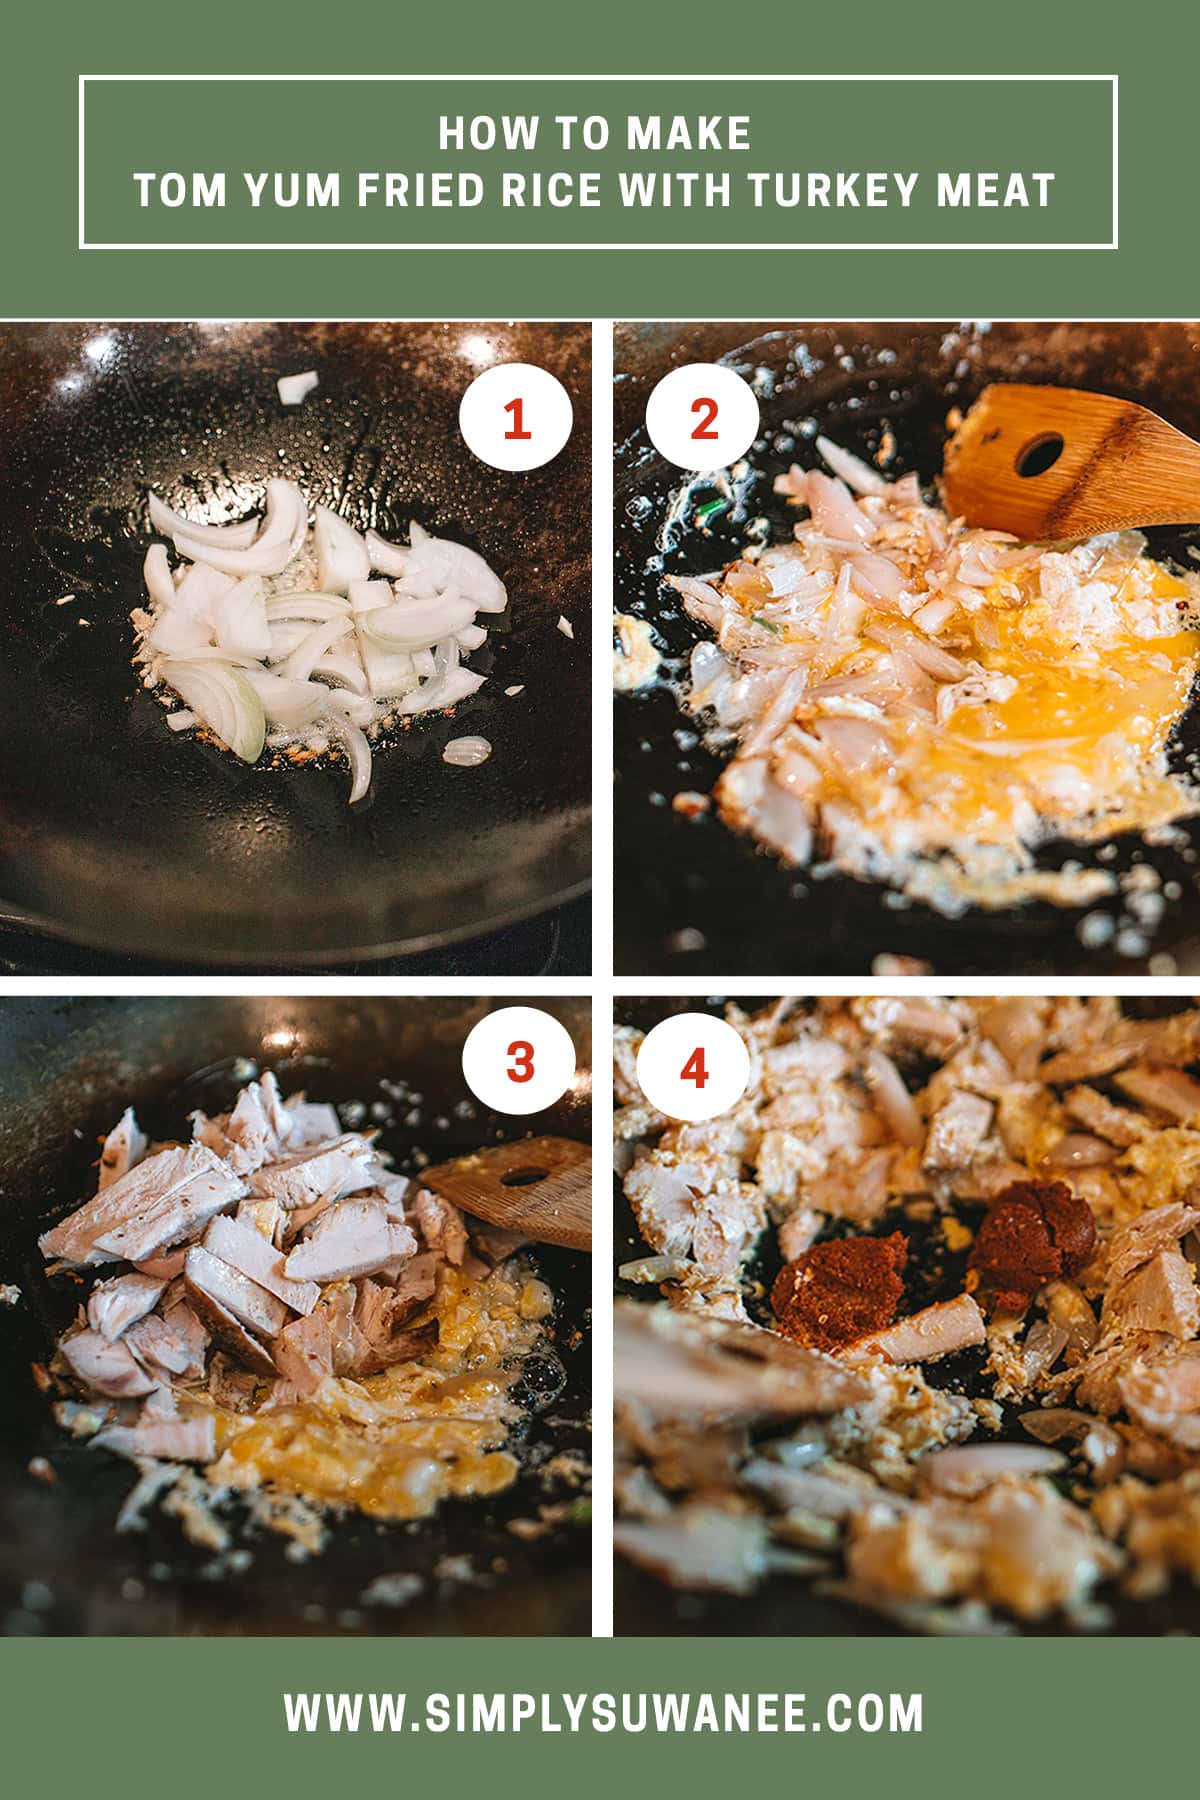 Steps 1-4 photos of how to make Tom Yum fried rice.